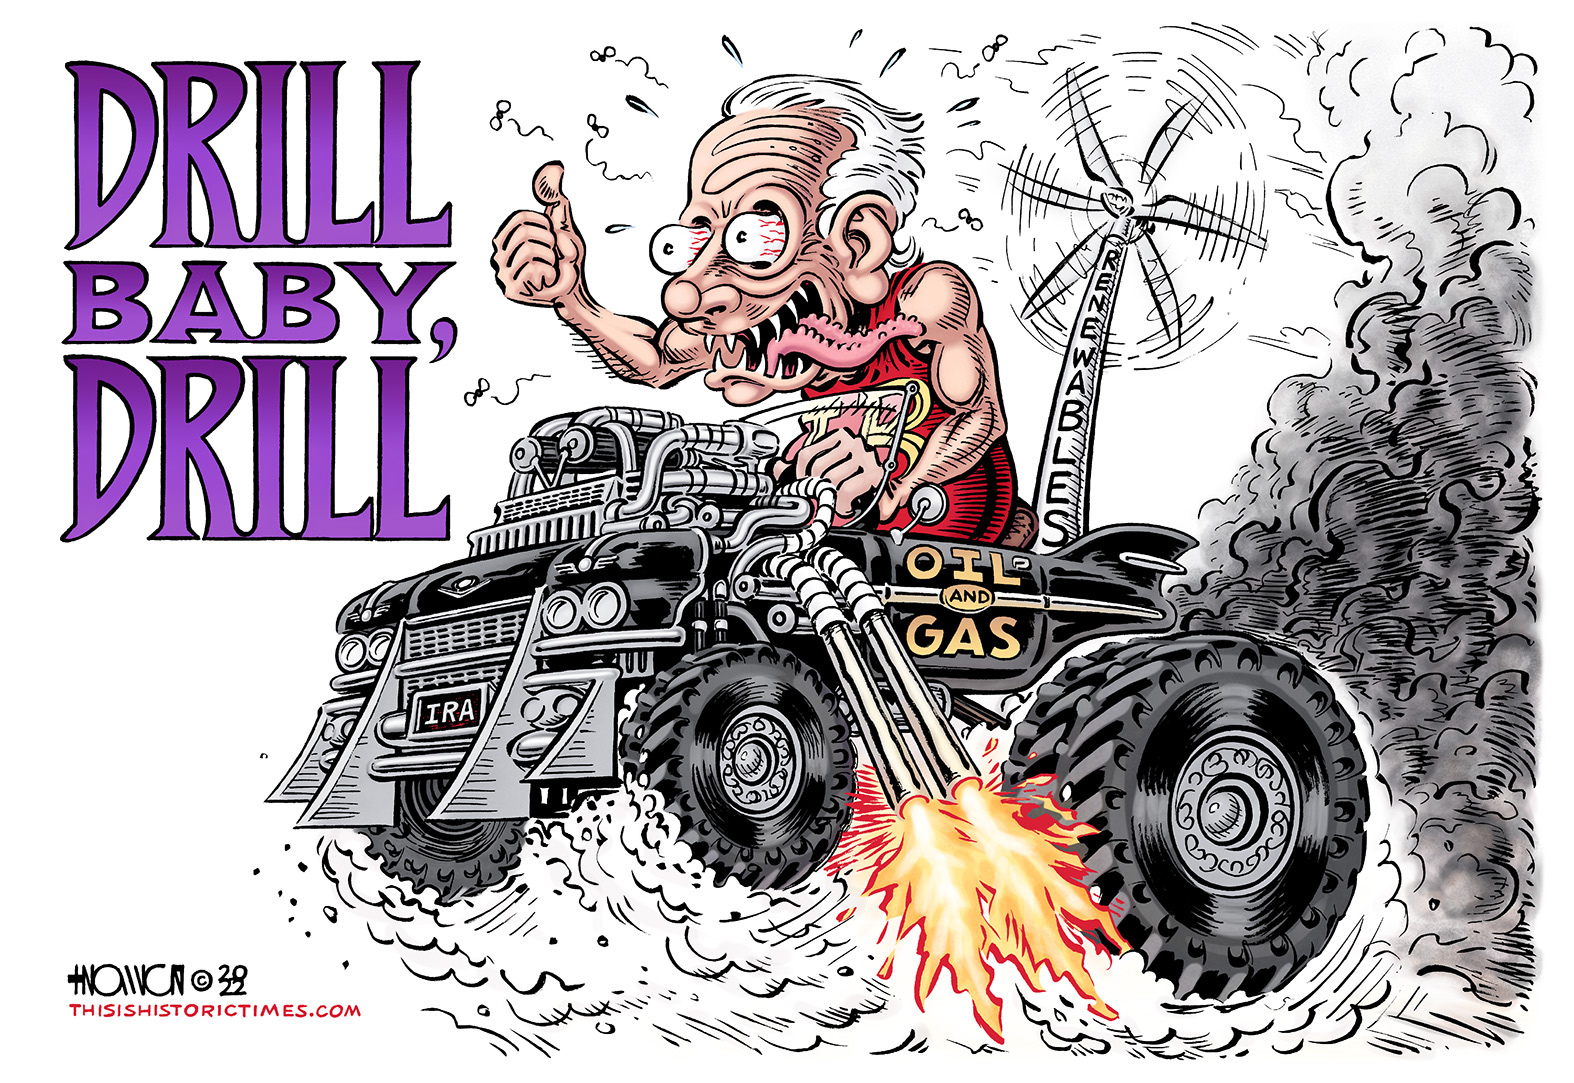 Joe Biden, drawn like Ed “Big Daddy” Roth's Rat Fink character, drives a souped-up roadster based on the Gigahorse from Mad Max: Fury Road. The car, representing massive increases in oil & gas drilling, carries a small windmill, representing paltry investment in renewable/green energy.